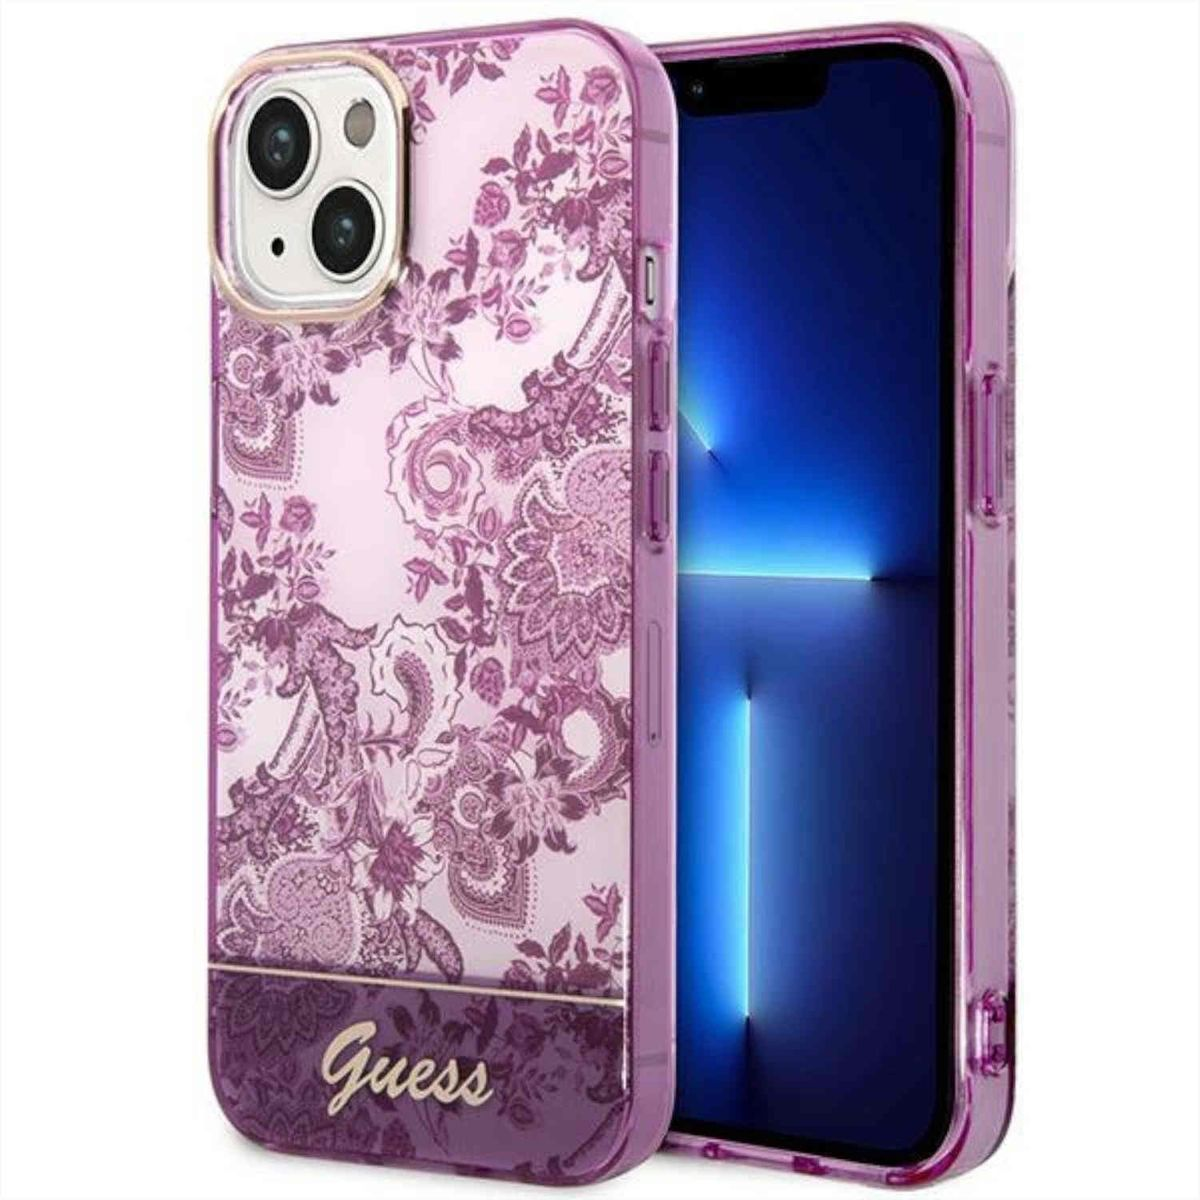 GUESS Design Muster TPU Apple, Backcover, 14, Lila PU iPhone Hülle, Leder / / PC